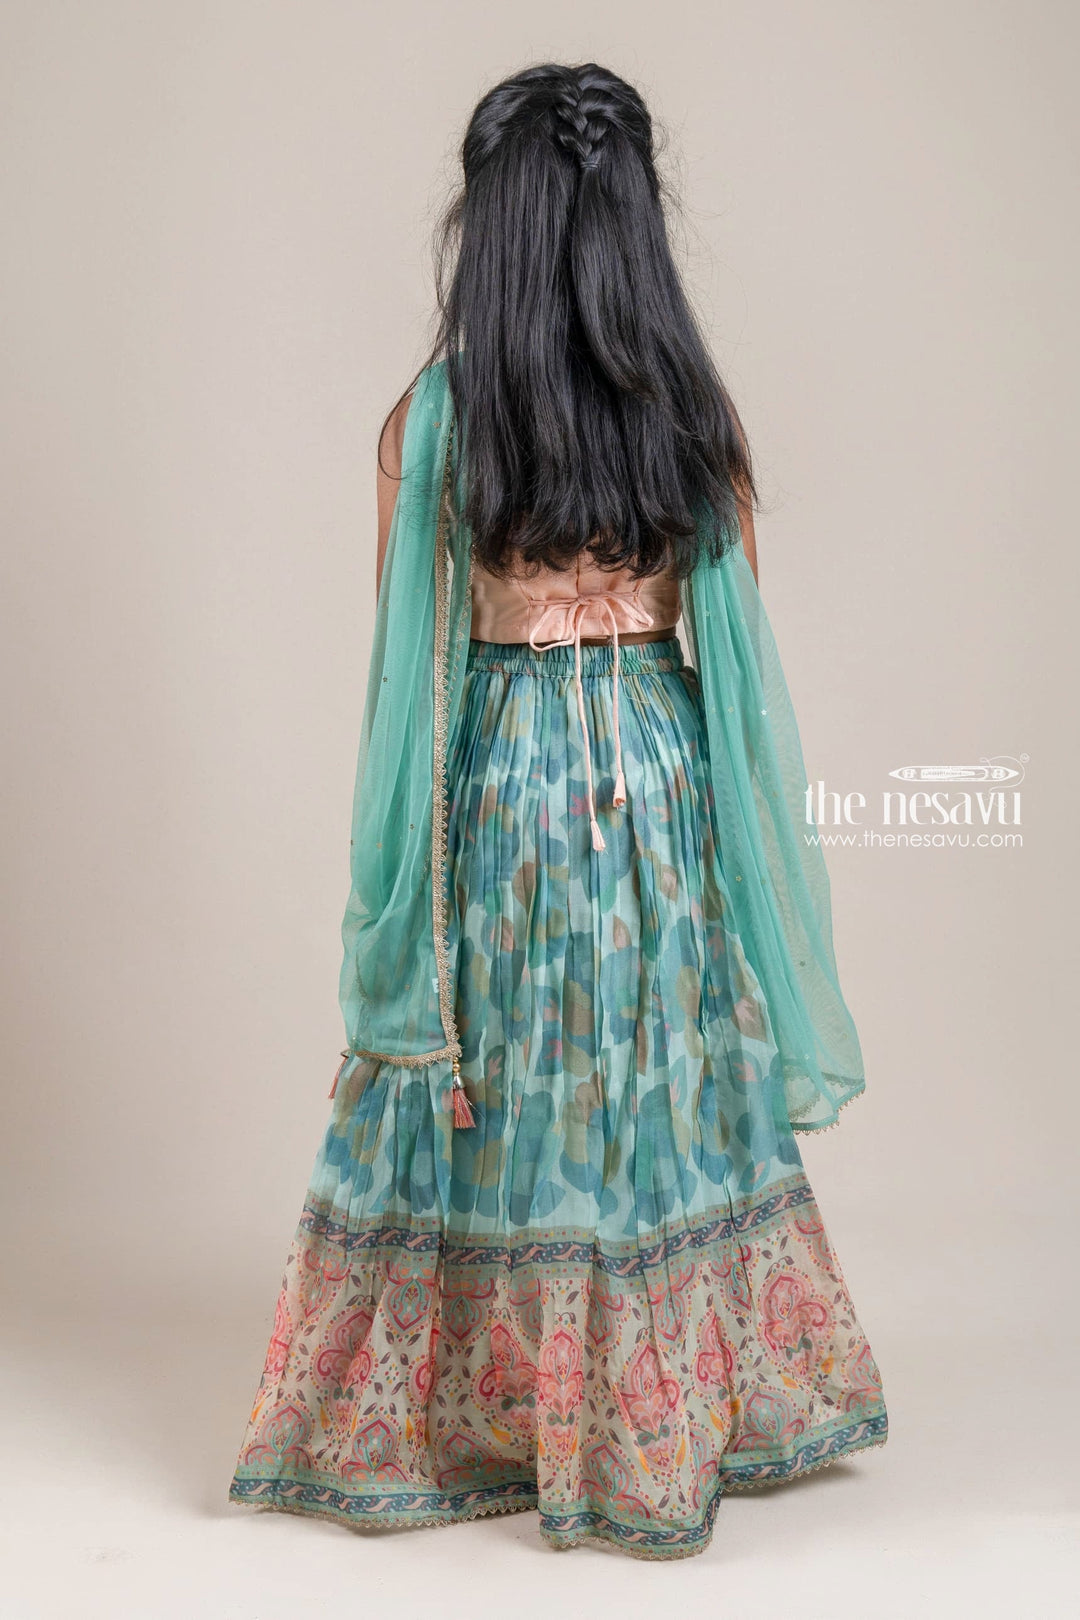 The Nesavu Lehenga & Ghagra Glitter Sequined Floral Embroidered Salmon Pink Crop Top with Pleated Floral Printed Green Lehenga Choli for Girls Nesavu Glitter Sequin and Floral Embroidered Lehenga Choli for Girls | The Nesavu